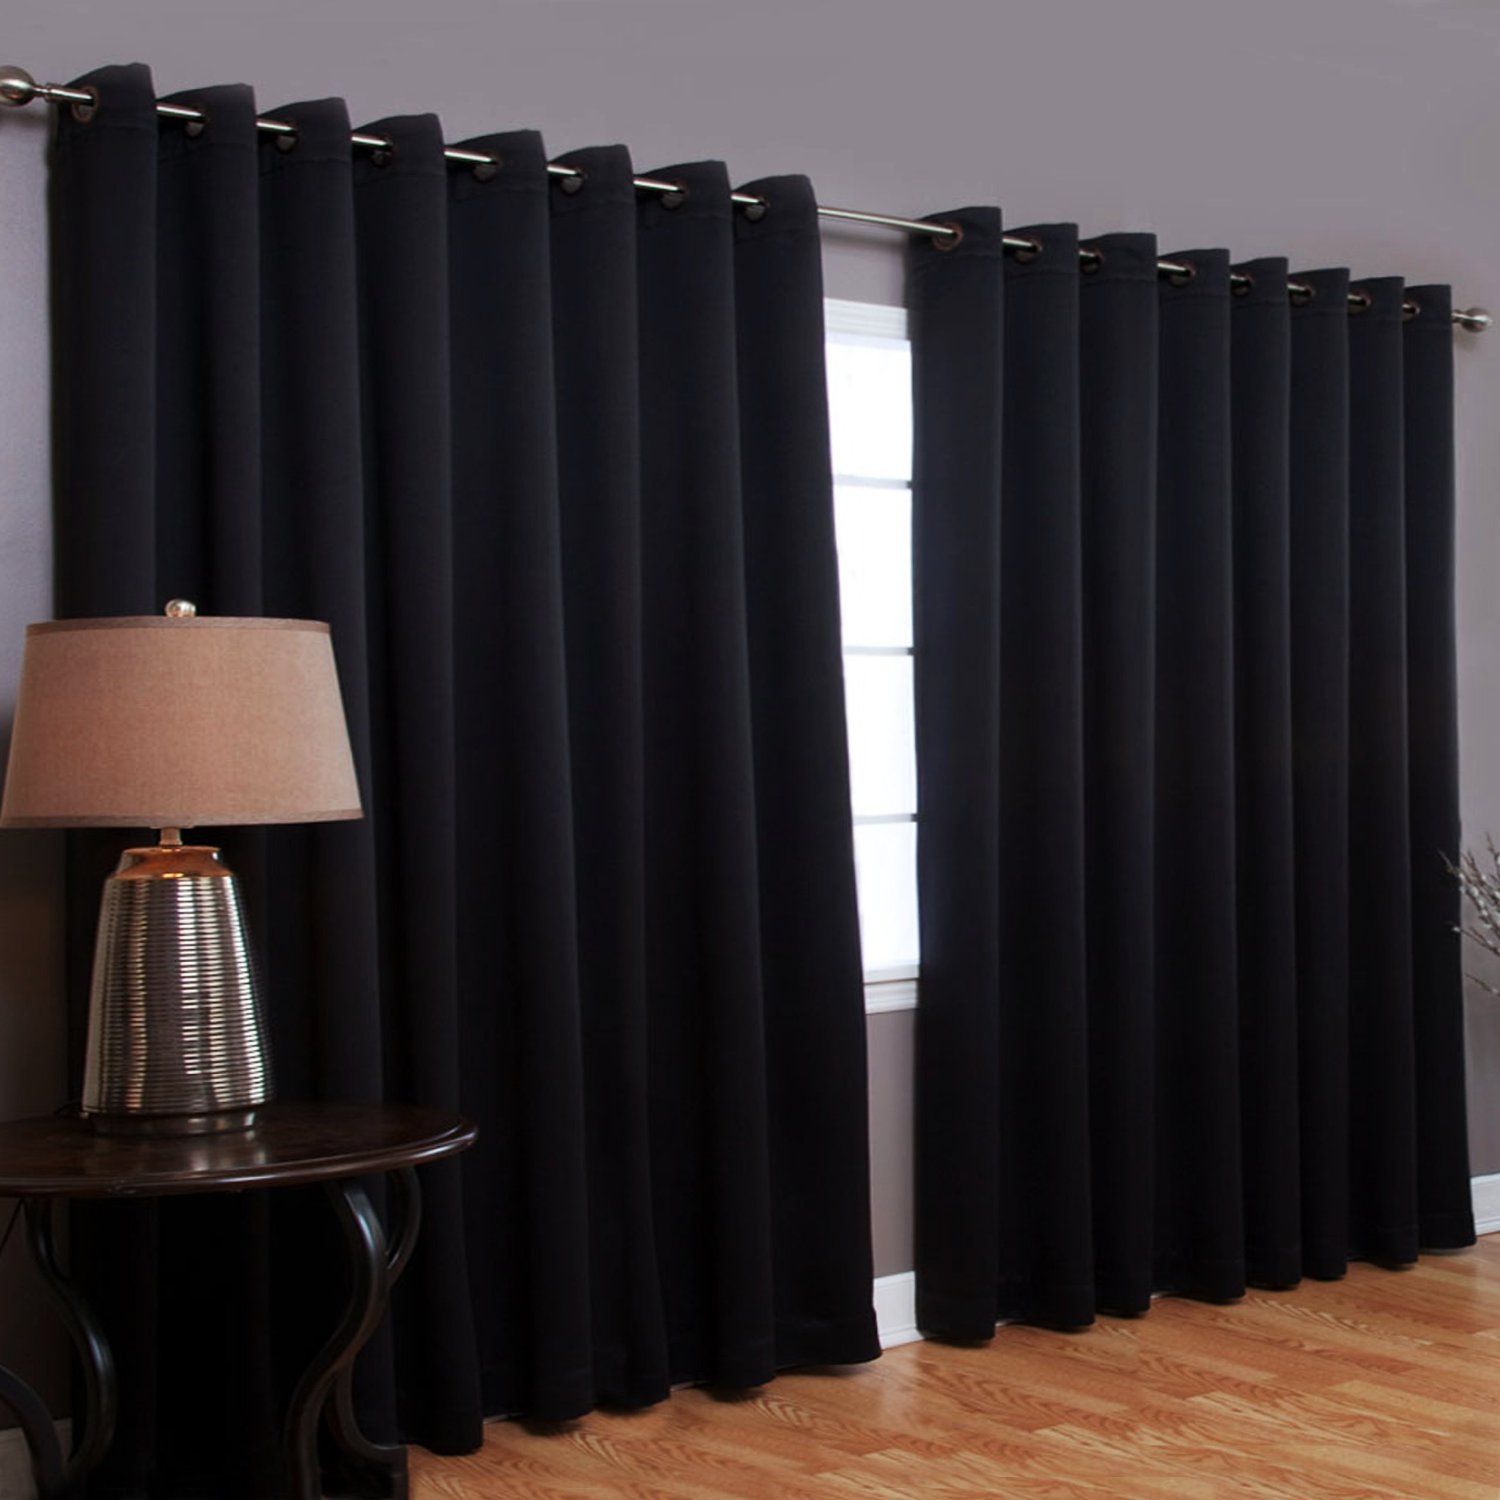 Black And White Stripped Curtains Best Thermal Curtains